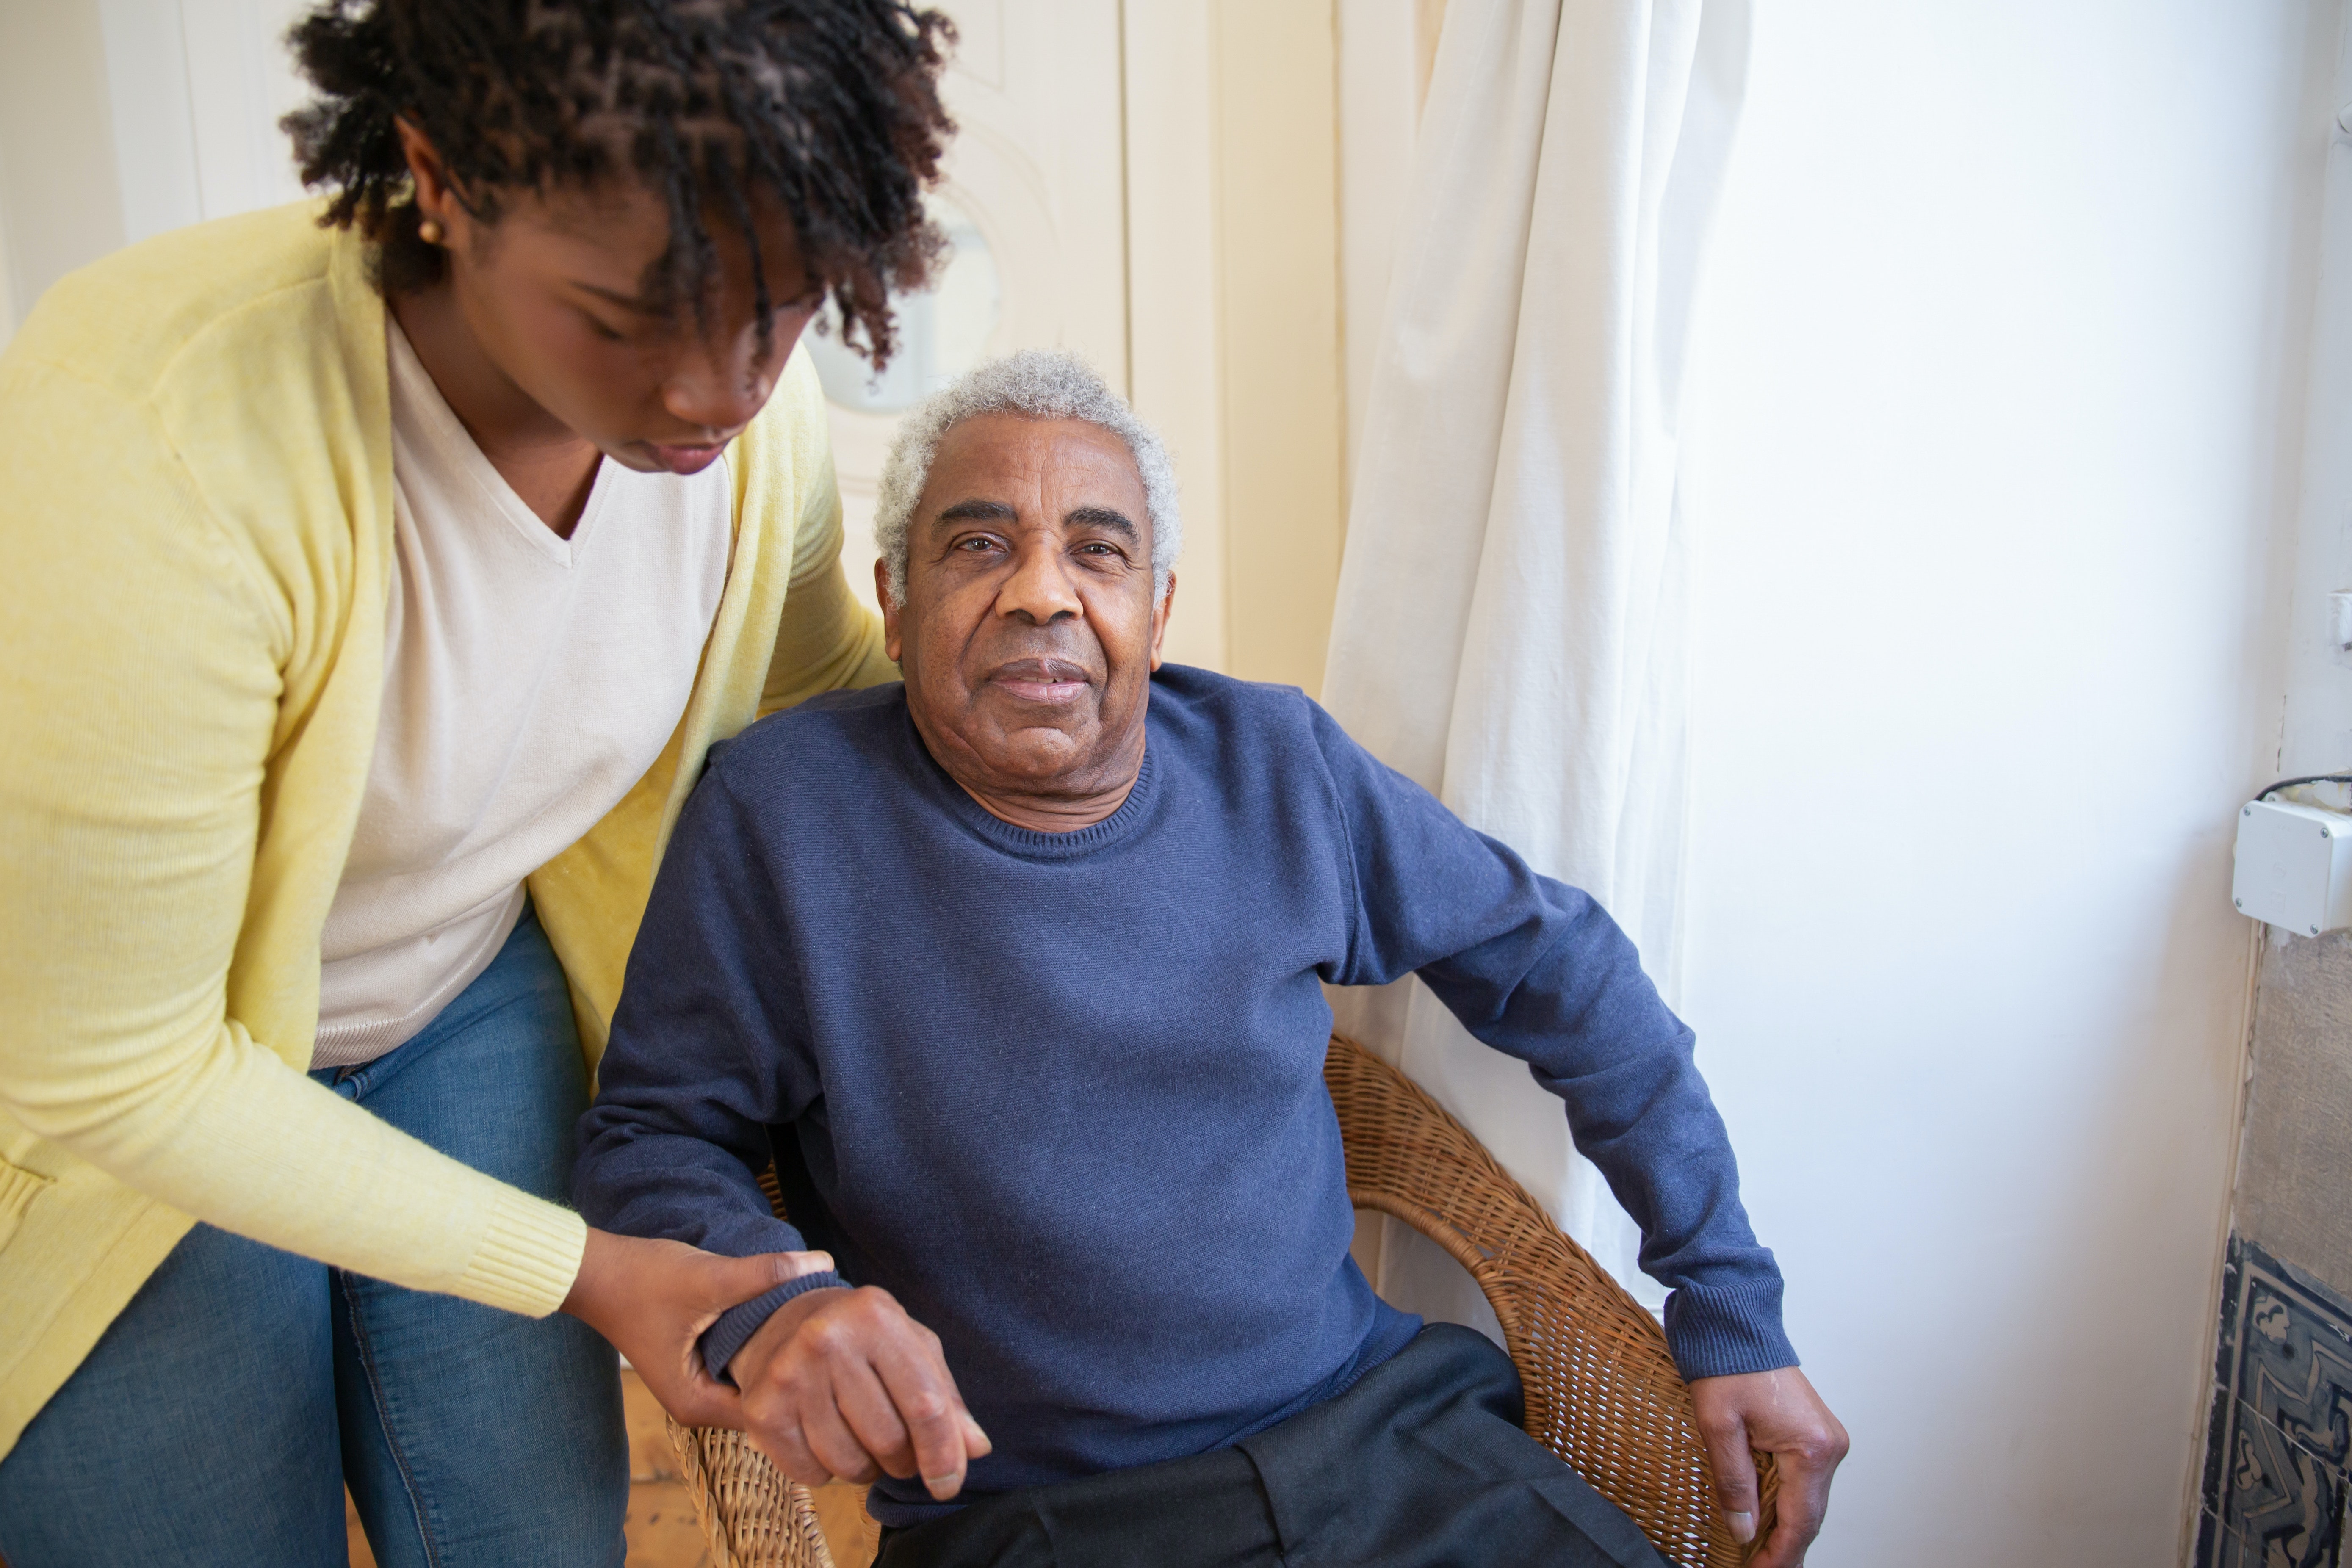 A female caregiver wearing a yellow sweater, helping a senior client to sit properly in his chair. He’s wearing a blue sweater and smiling.